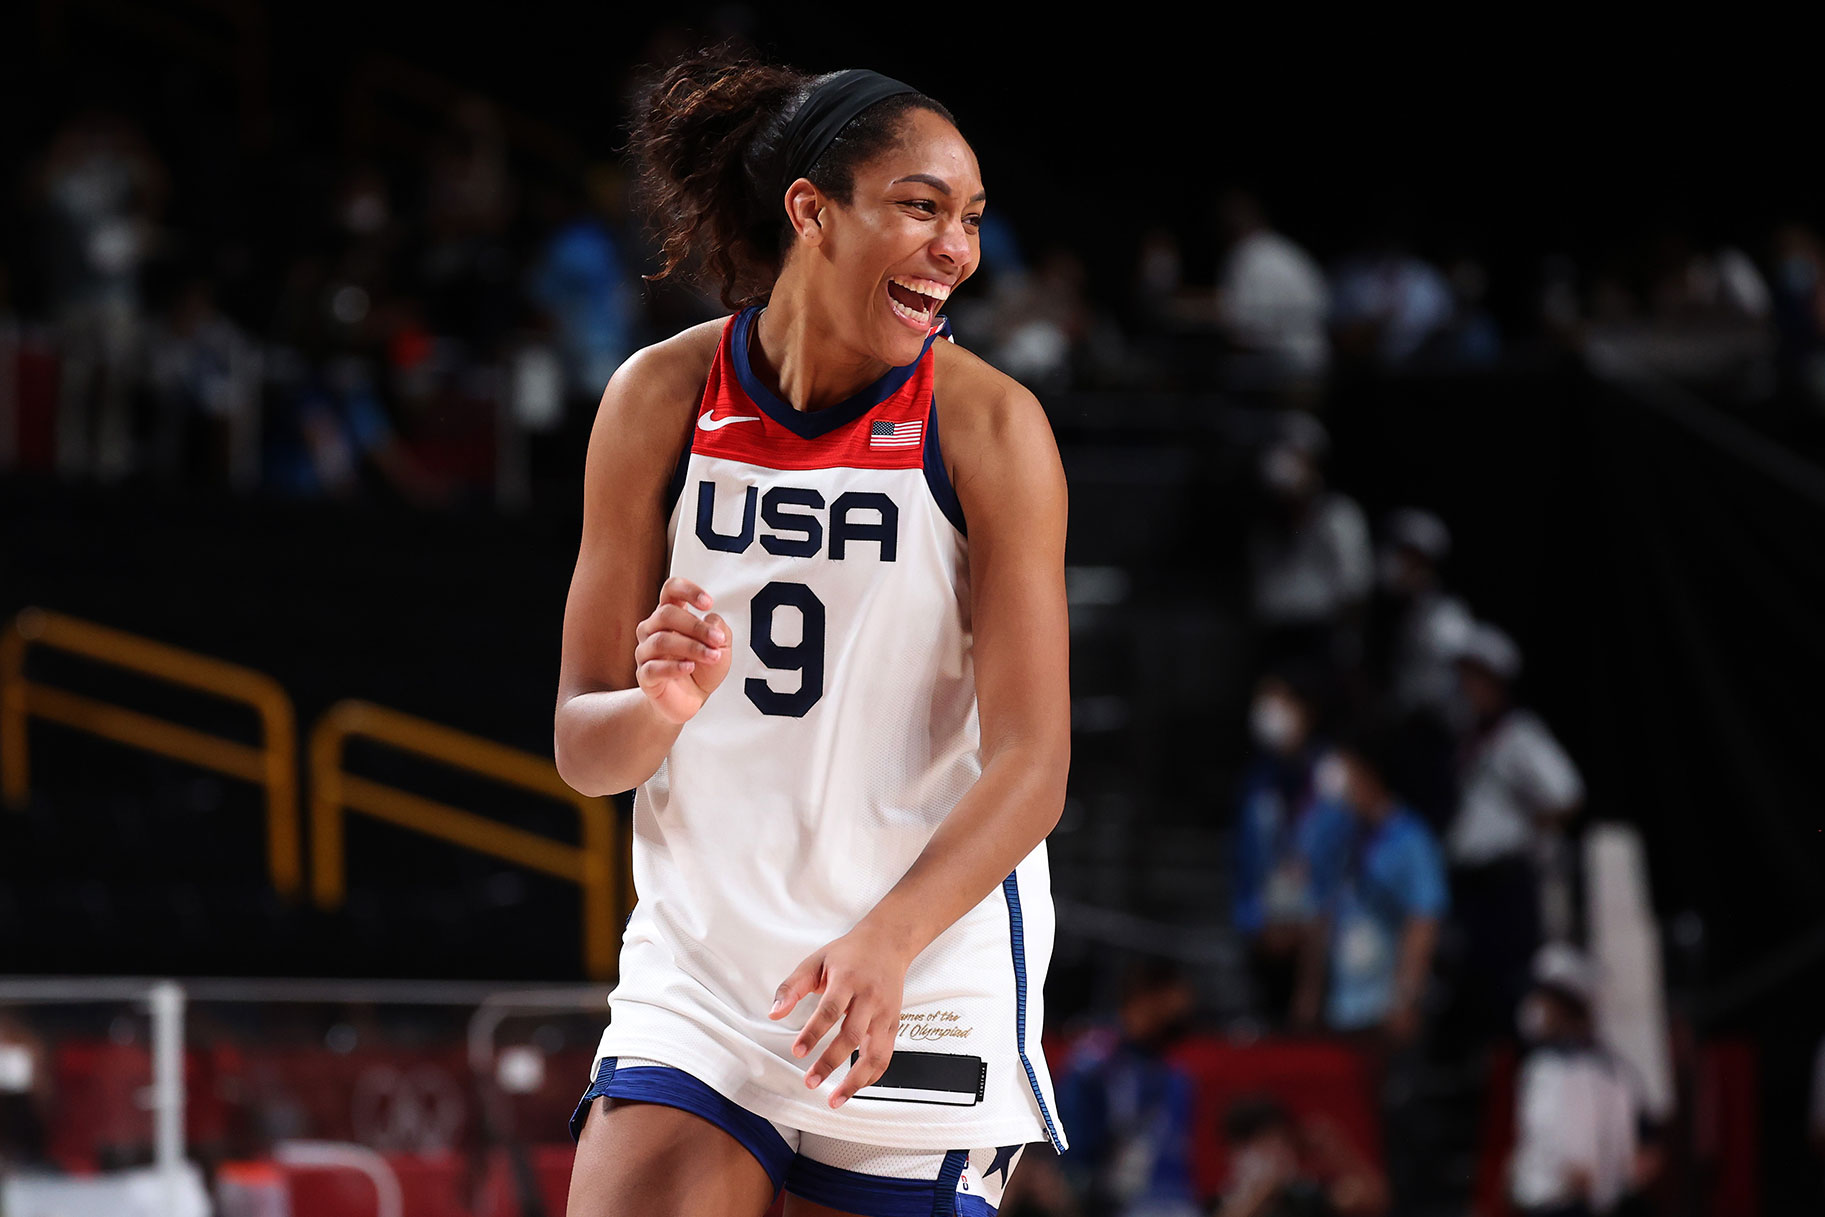 A'Ja Wilson celebrates a win over Japan in the Women's Basketball final game on day sixteen of the 2020 Tokyo Olympic games